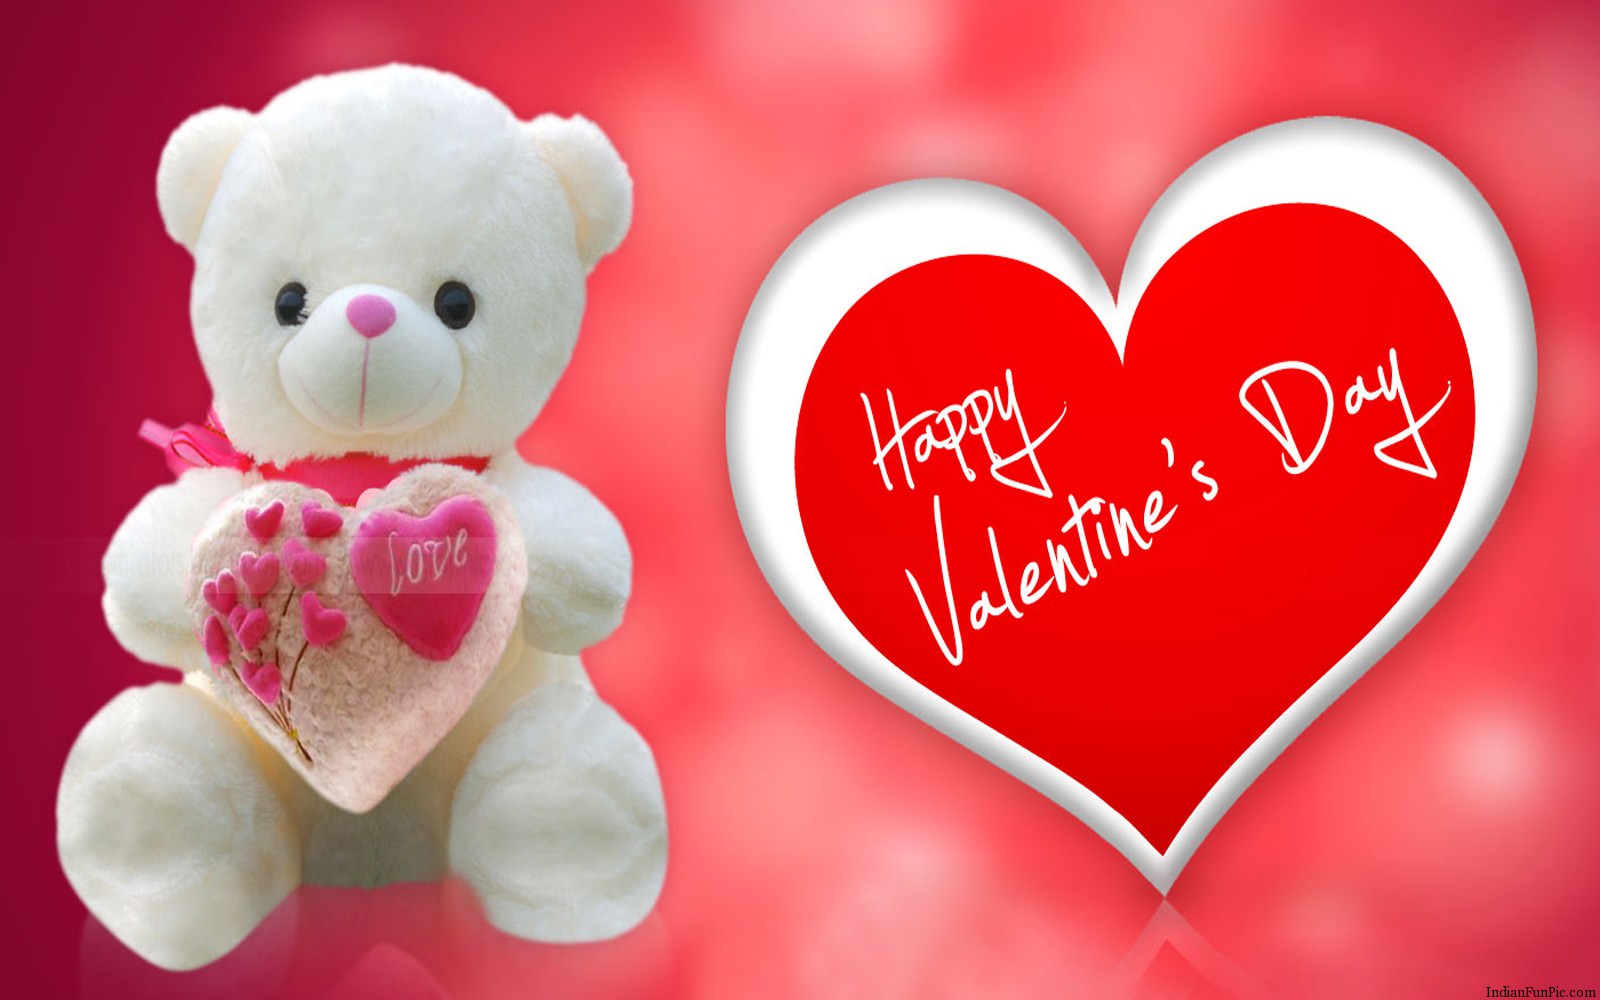 Happy Valentine Day HD Wallpapers - 2016 - HD Wallpapers Inx